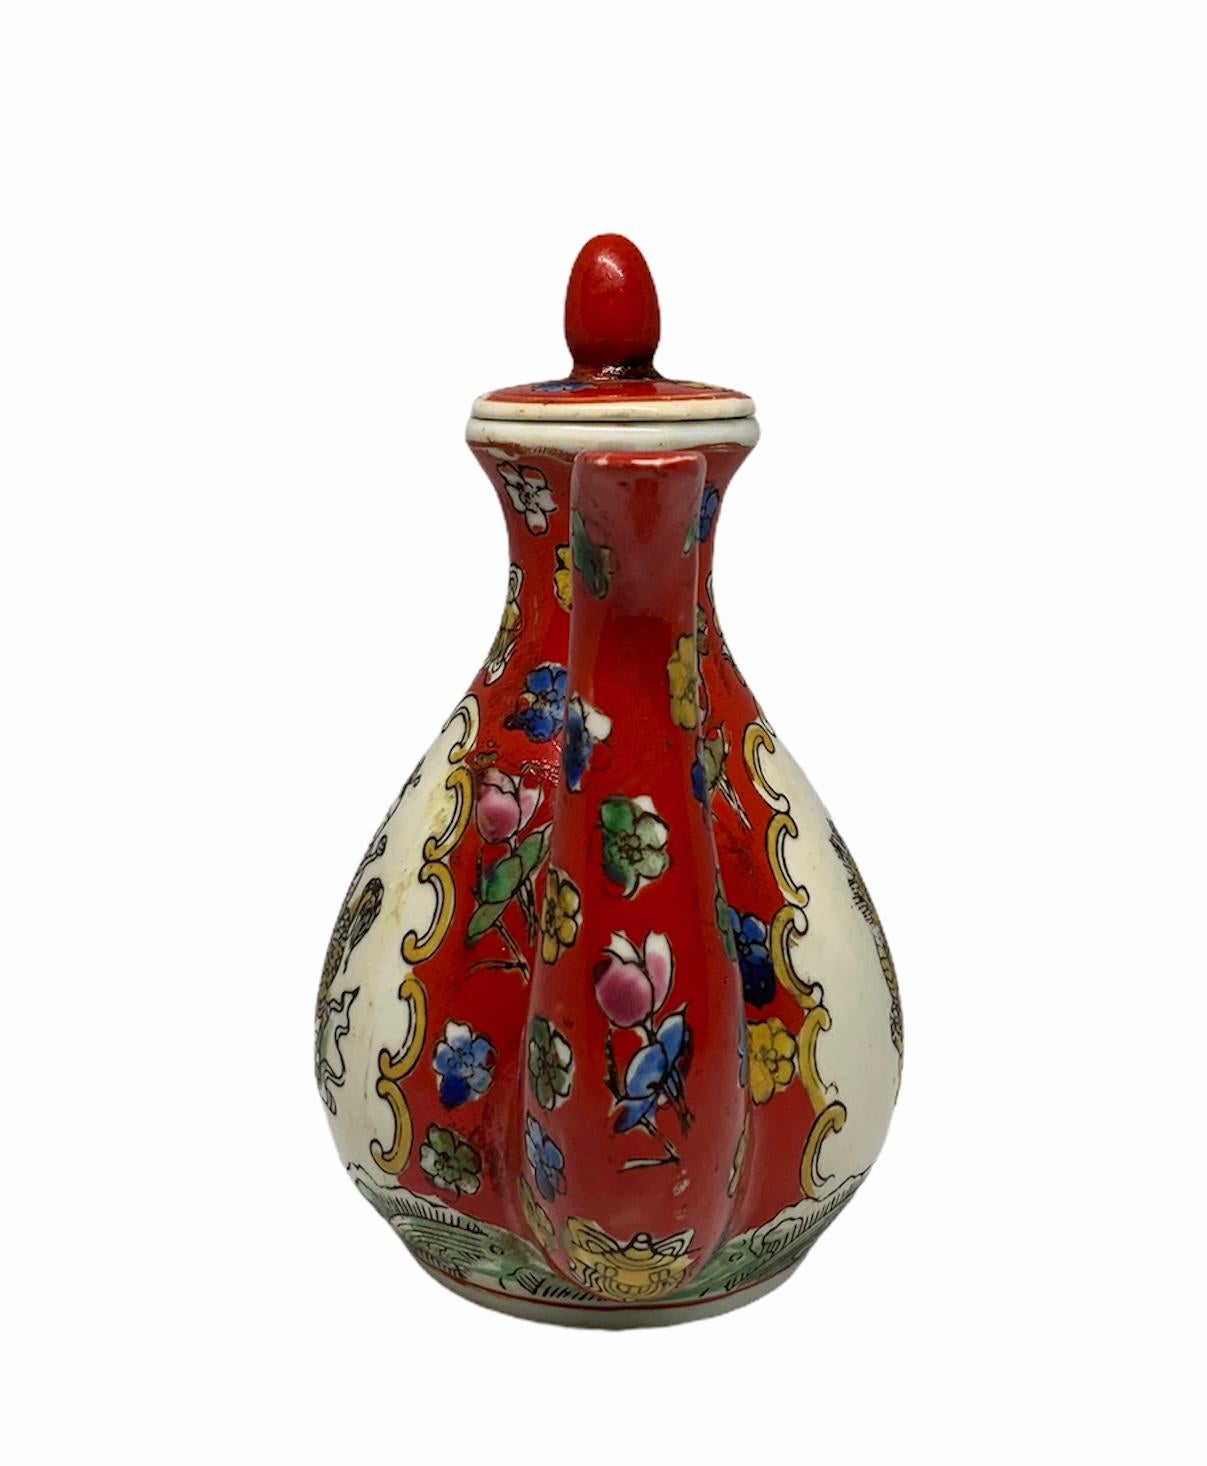 This is a small Chinese hand painted wine pot or teapot depicting a red background with some tiny different colors flowers. In the front and back center there is a scene of a Chinese man riding a 